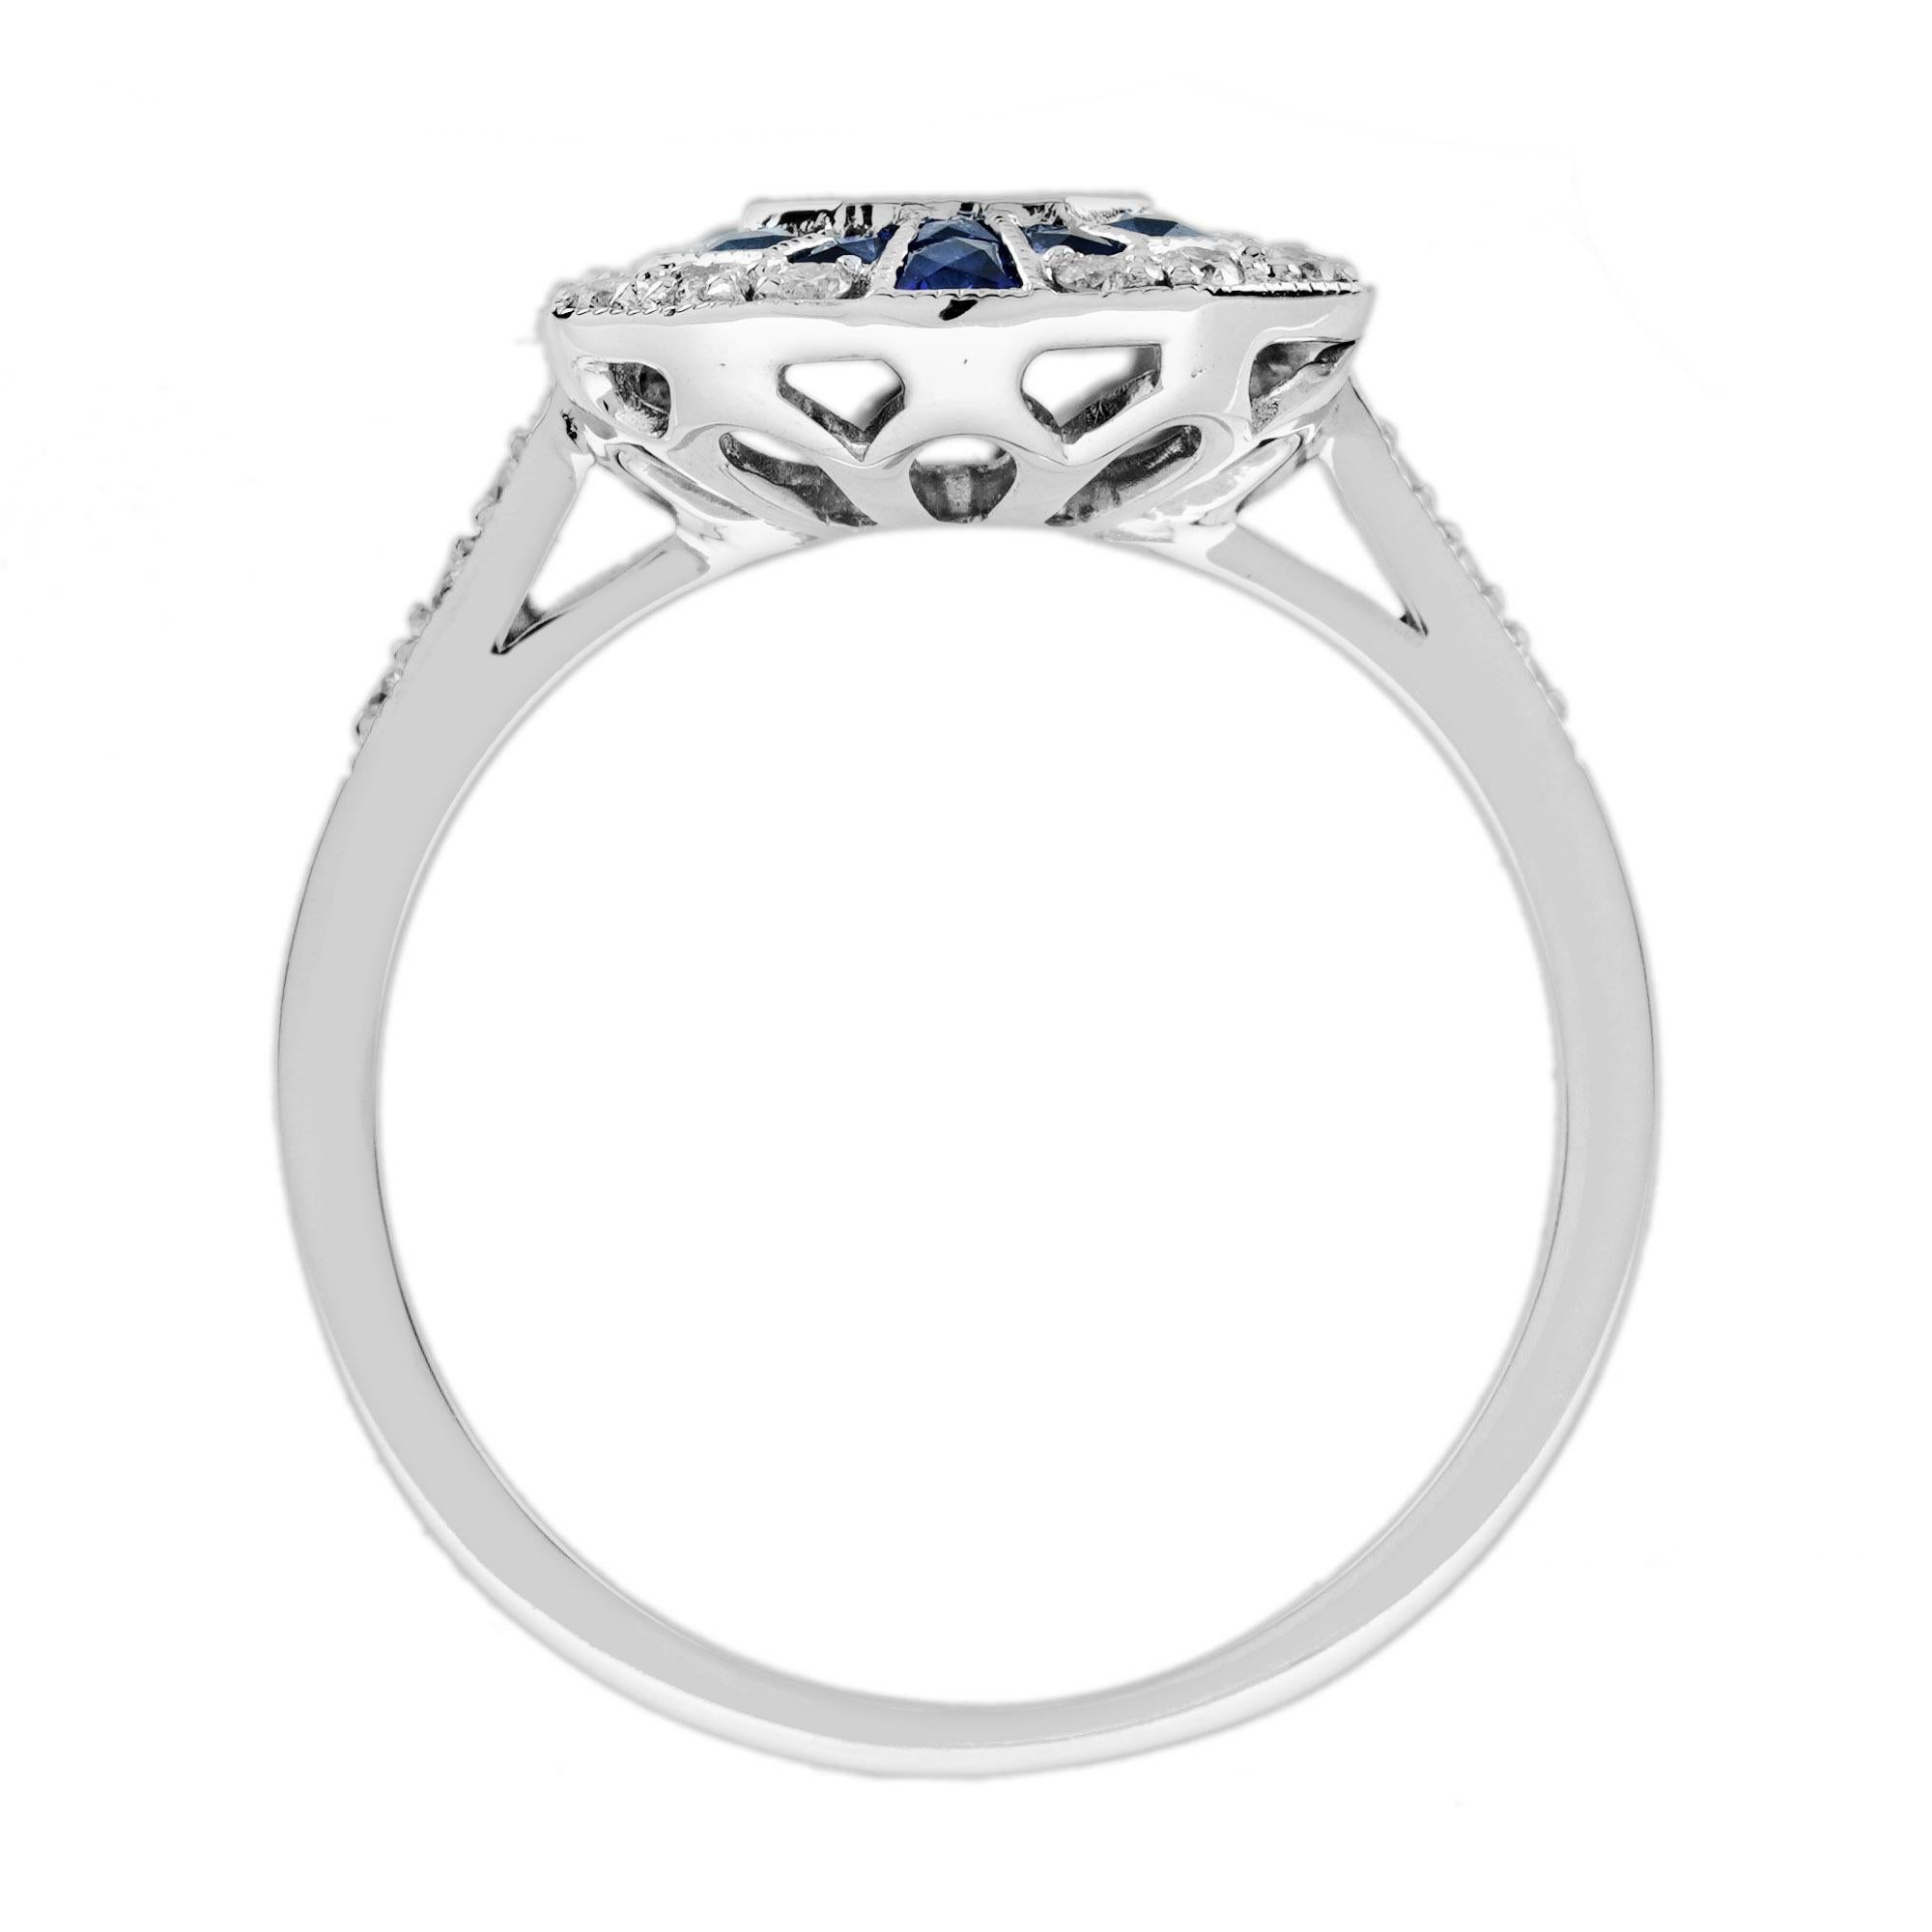 Illusion Set Diamond and Blue Sapphire Art Deco Style Ring in 18K White Gold 1